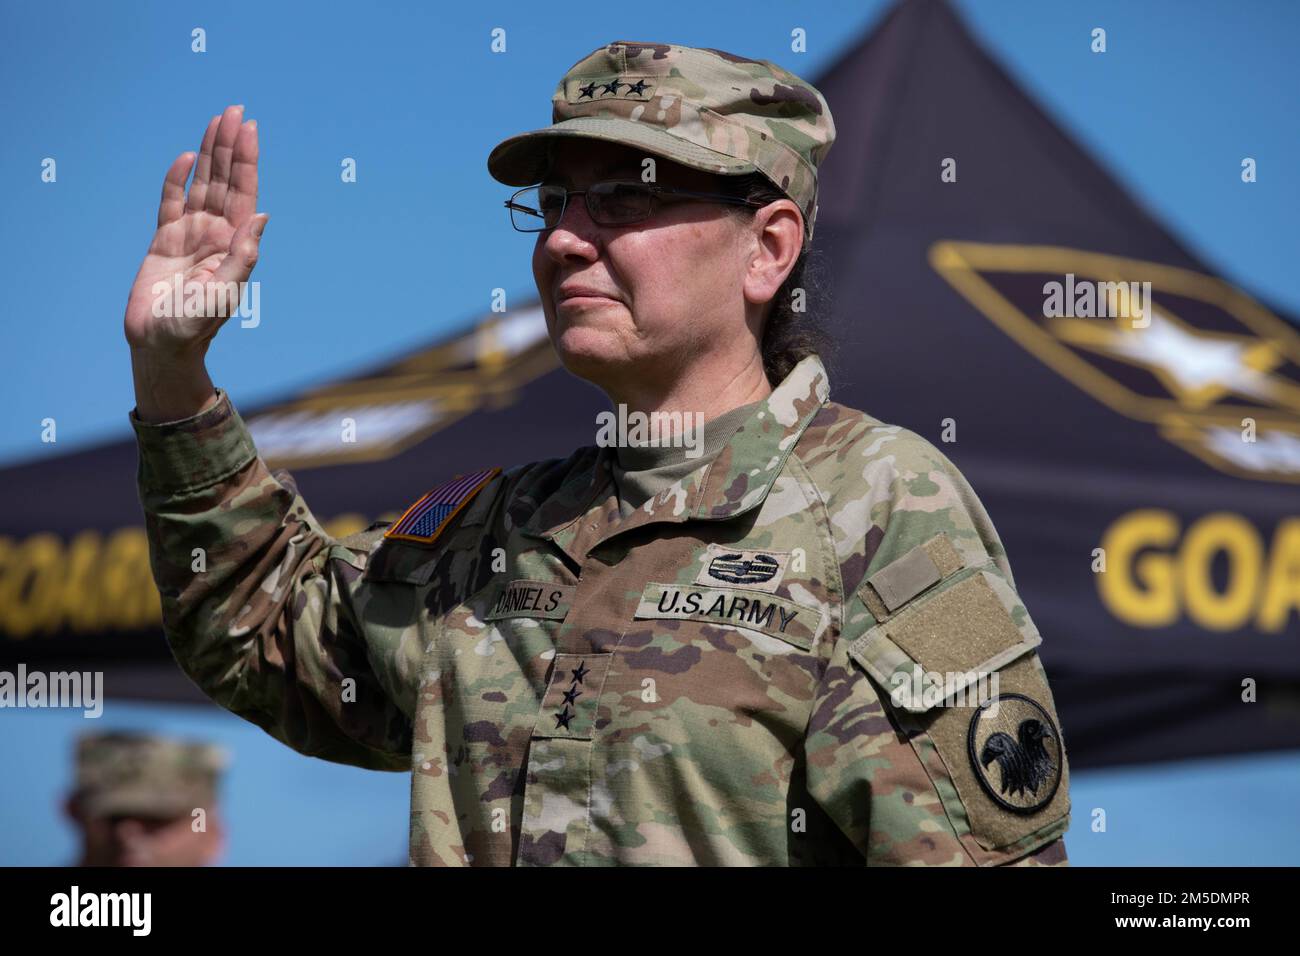 SAN JUAN, Puerto Rico—Chief of Army Reserve Lt. Gen. Jody J. Daniels, commanding general of the U.S. Army Reserve Command, administers the Oath of Enlistment to 48 future soldiers at the historic Castillo San Cristobal, Puerto Rico , March 5, 2022. Stock Photo